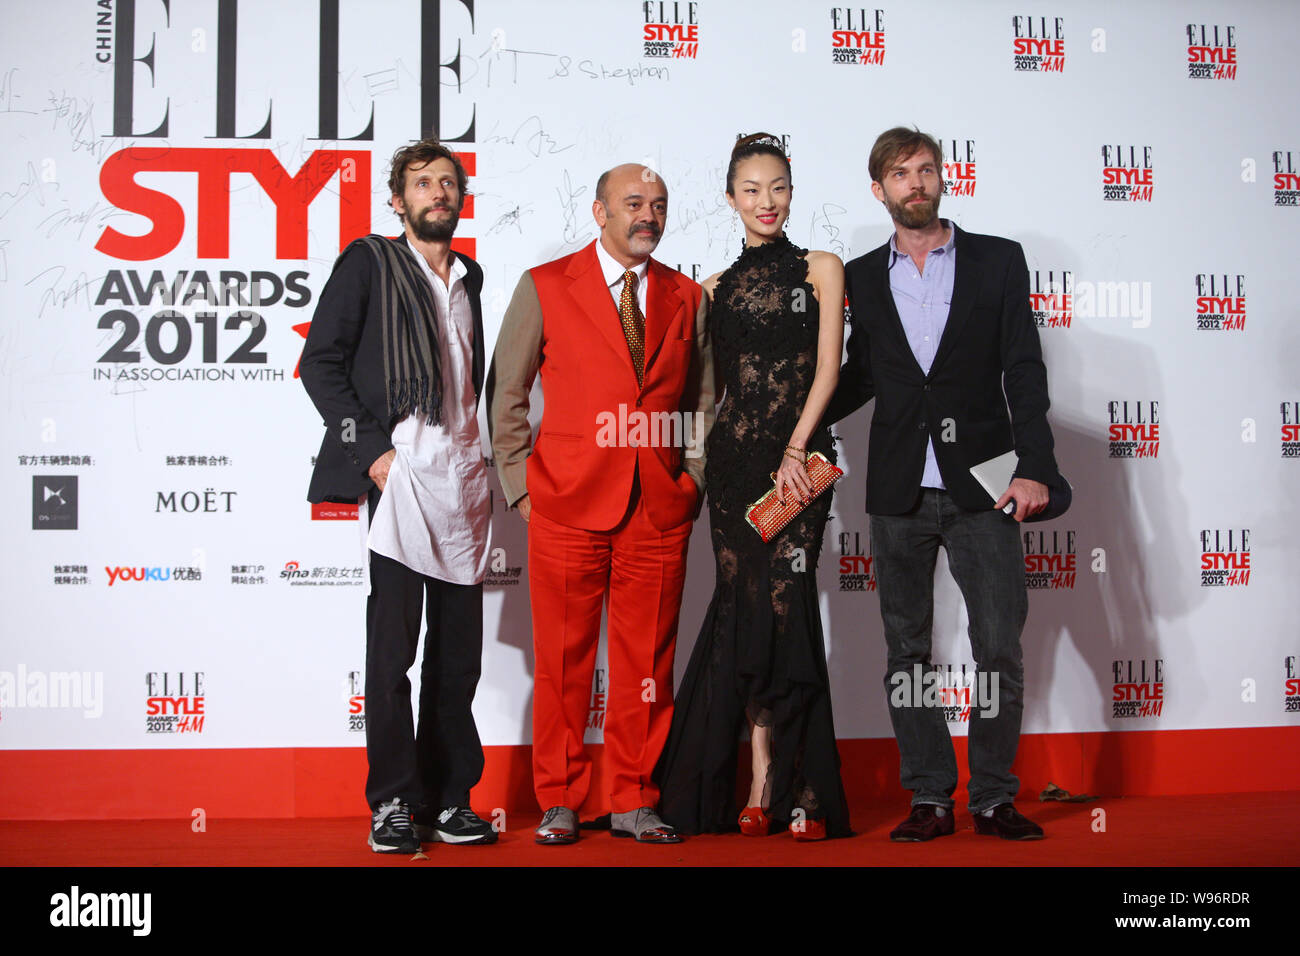 French footwear designer Christian Louboutin, second left, poses with  Chinese model Ge Peiqi, second right, and other guests as they arrive for  the El Stock Photo - Alamy